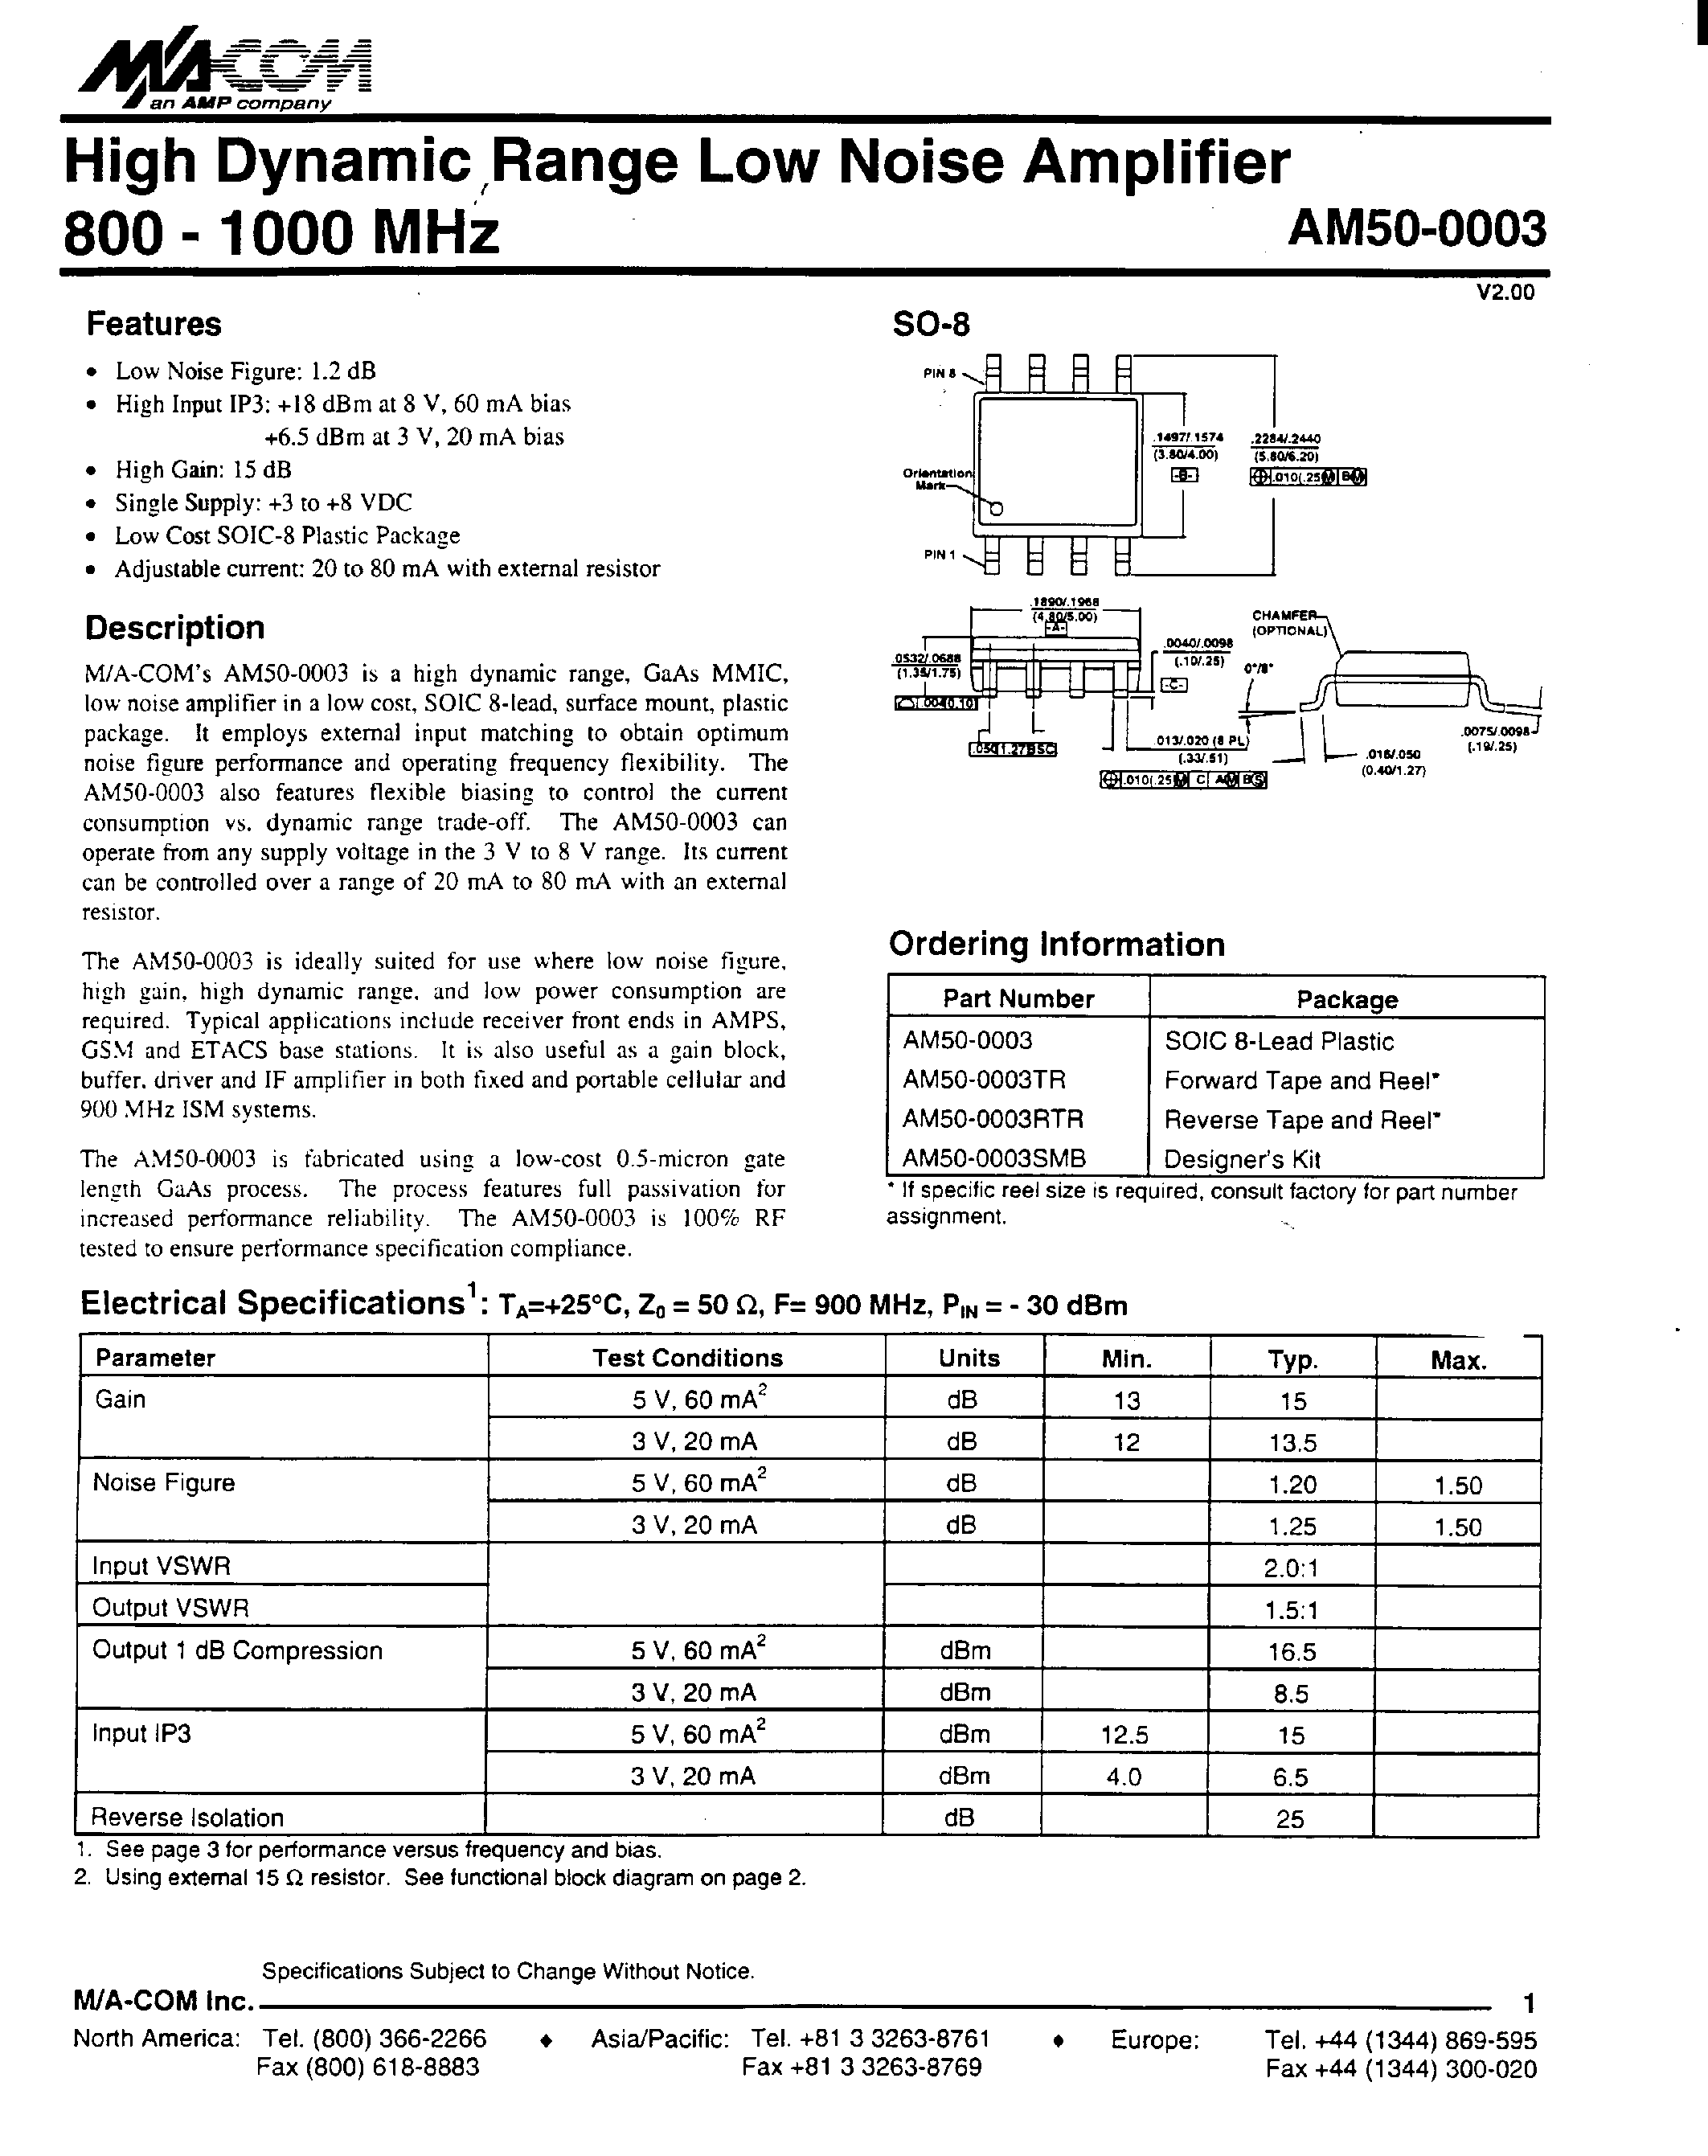 Datasheet AM50-0003 - High Dynamic Range Low Noise Amplifier 800-1000 MHz page 1